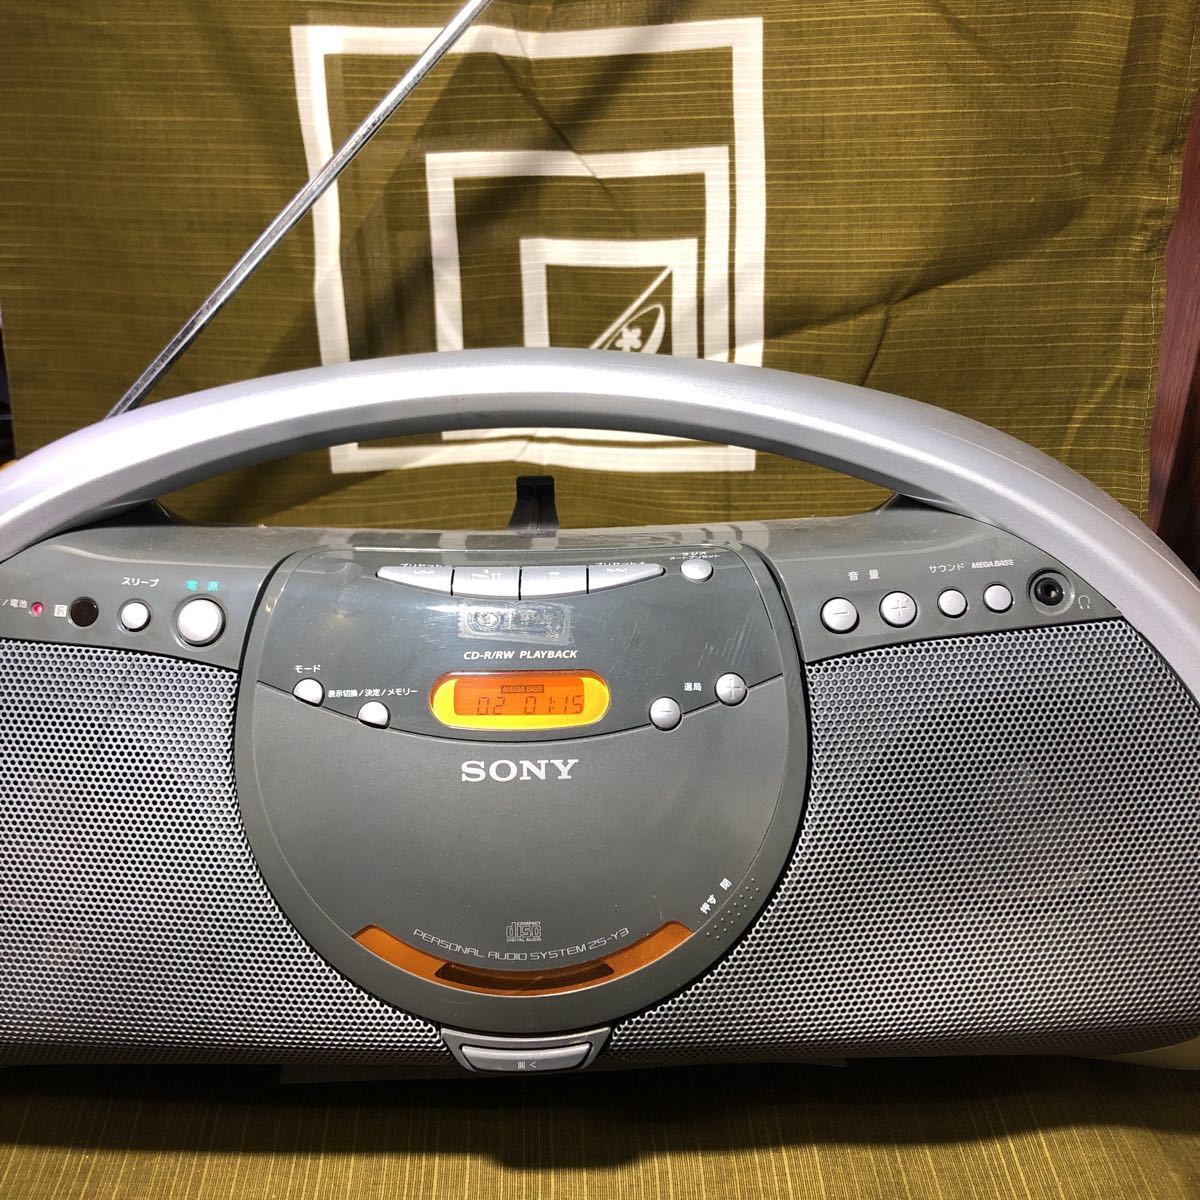 refle SONY Sony personal audio system ZS-Y3 CD radio (AM, wide FM) once Junk 